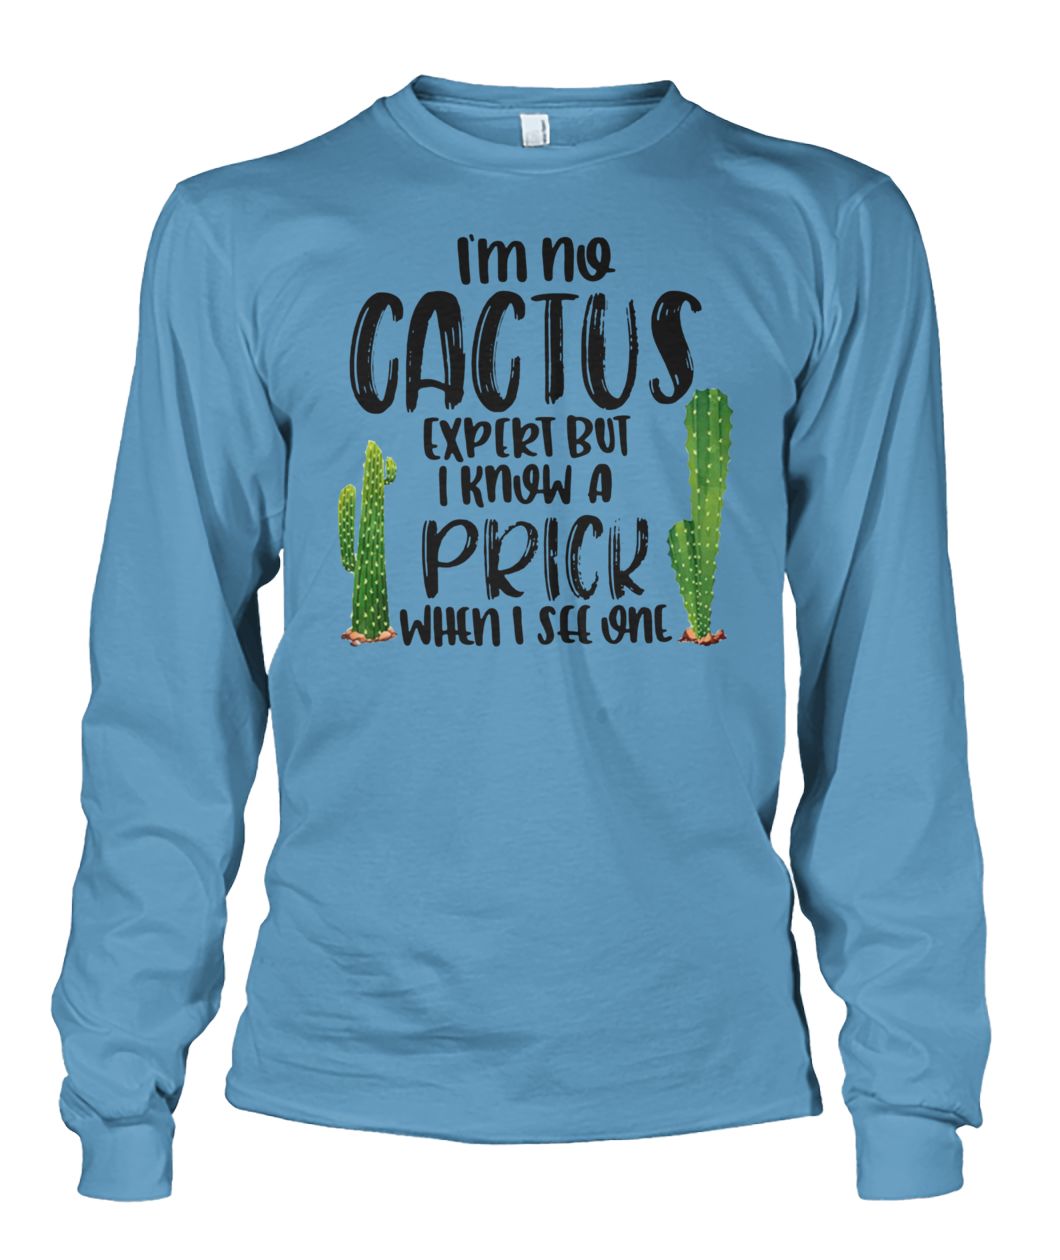 I'm no cactus expert but I know a prick when I see one unisex long sleeve